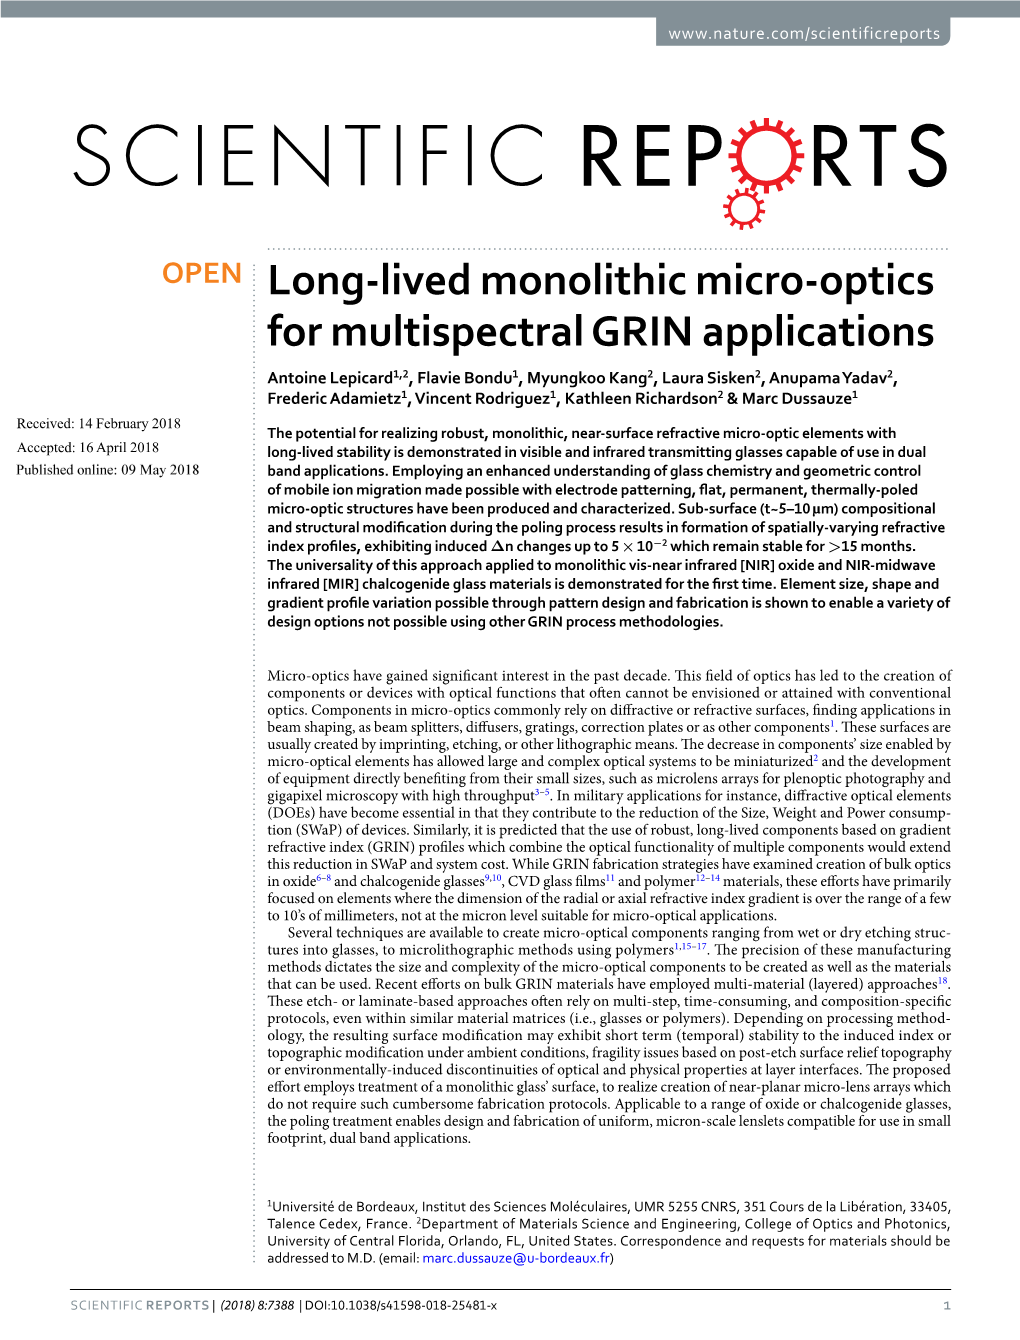 Long-Lived Monolithic Micro-Optics for Multispectral GRIN Applications